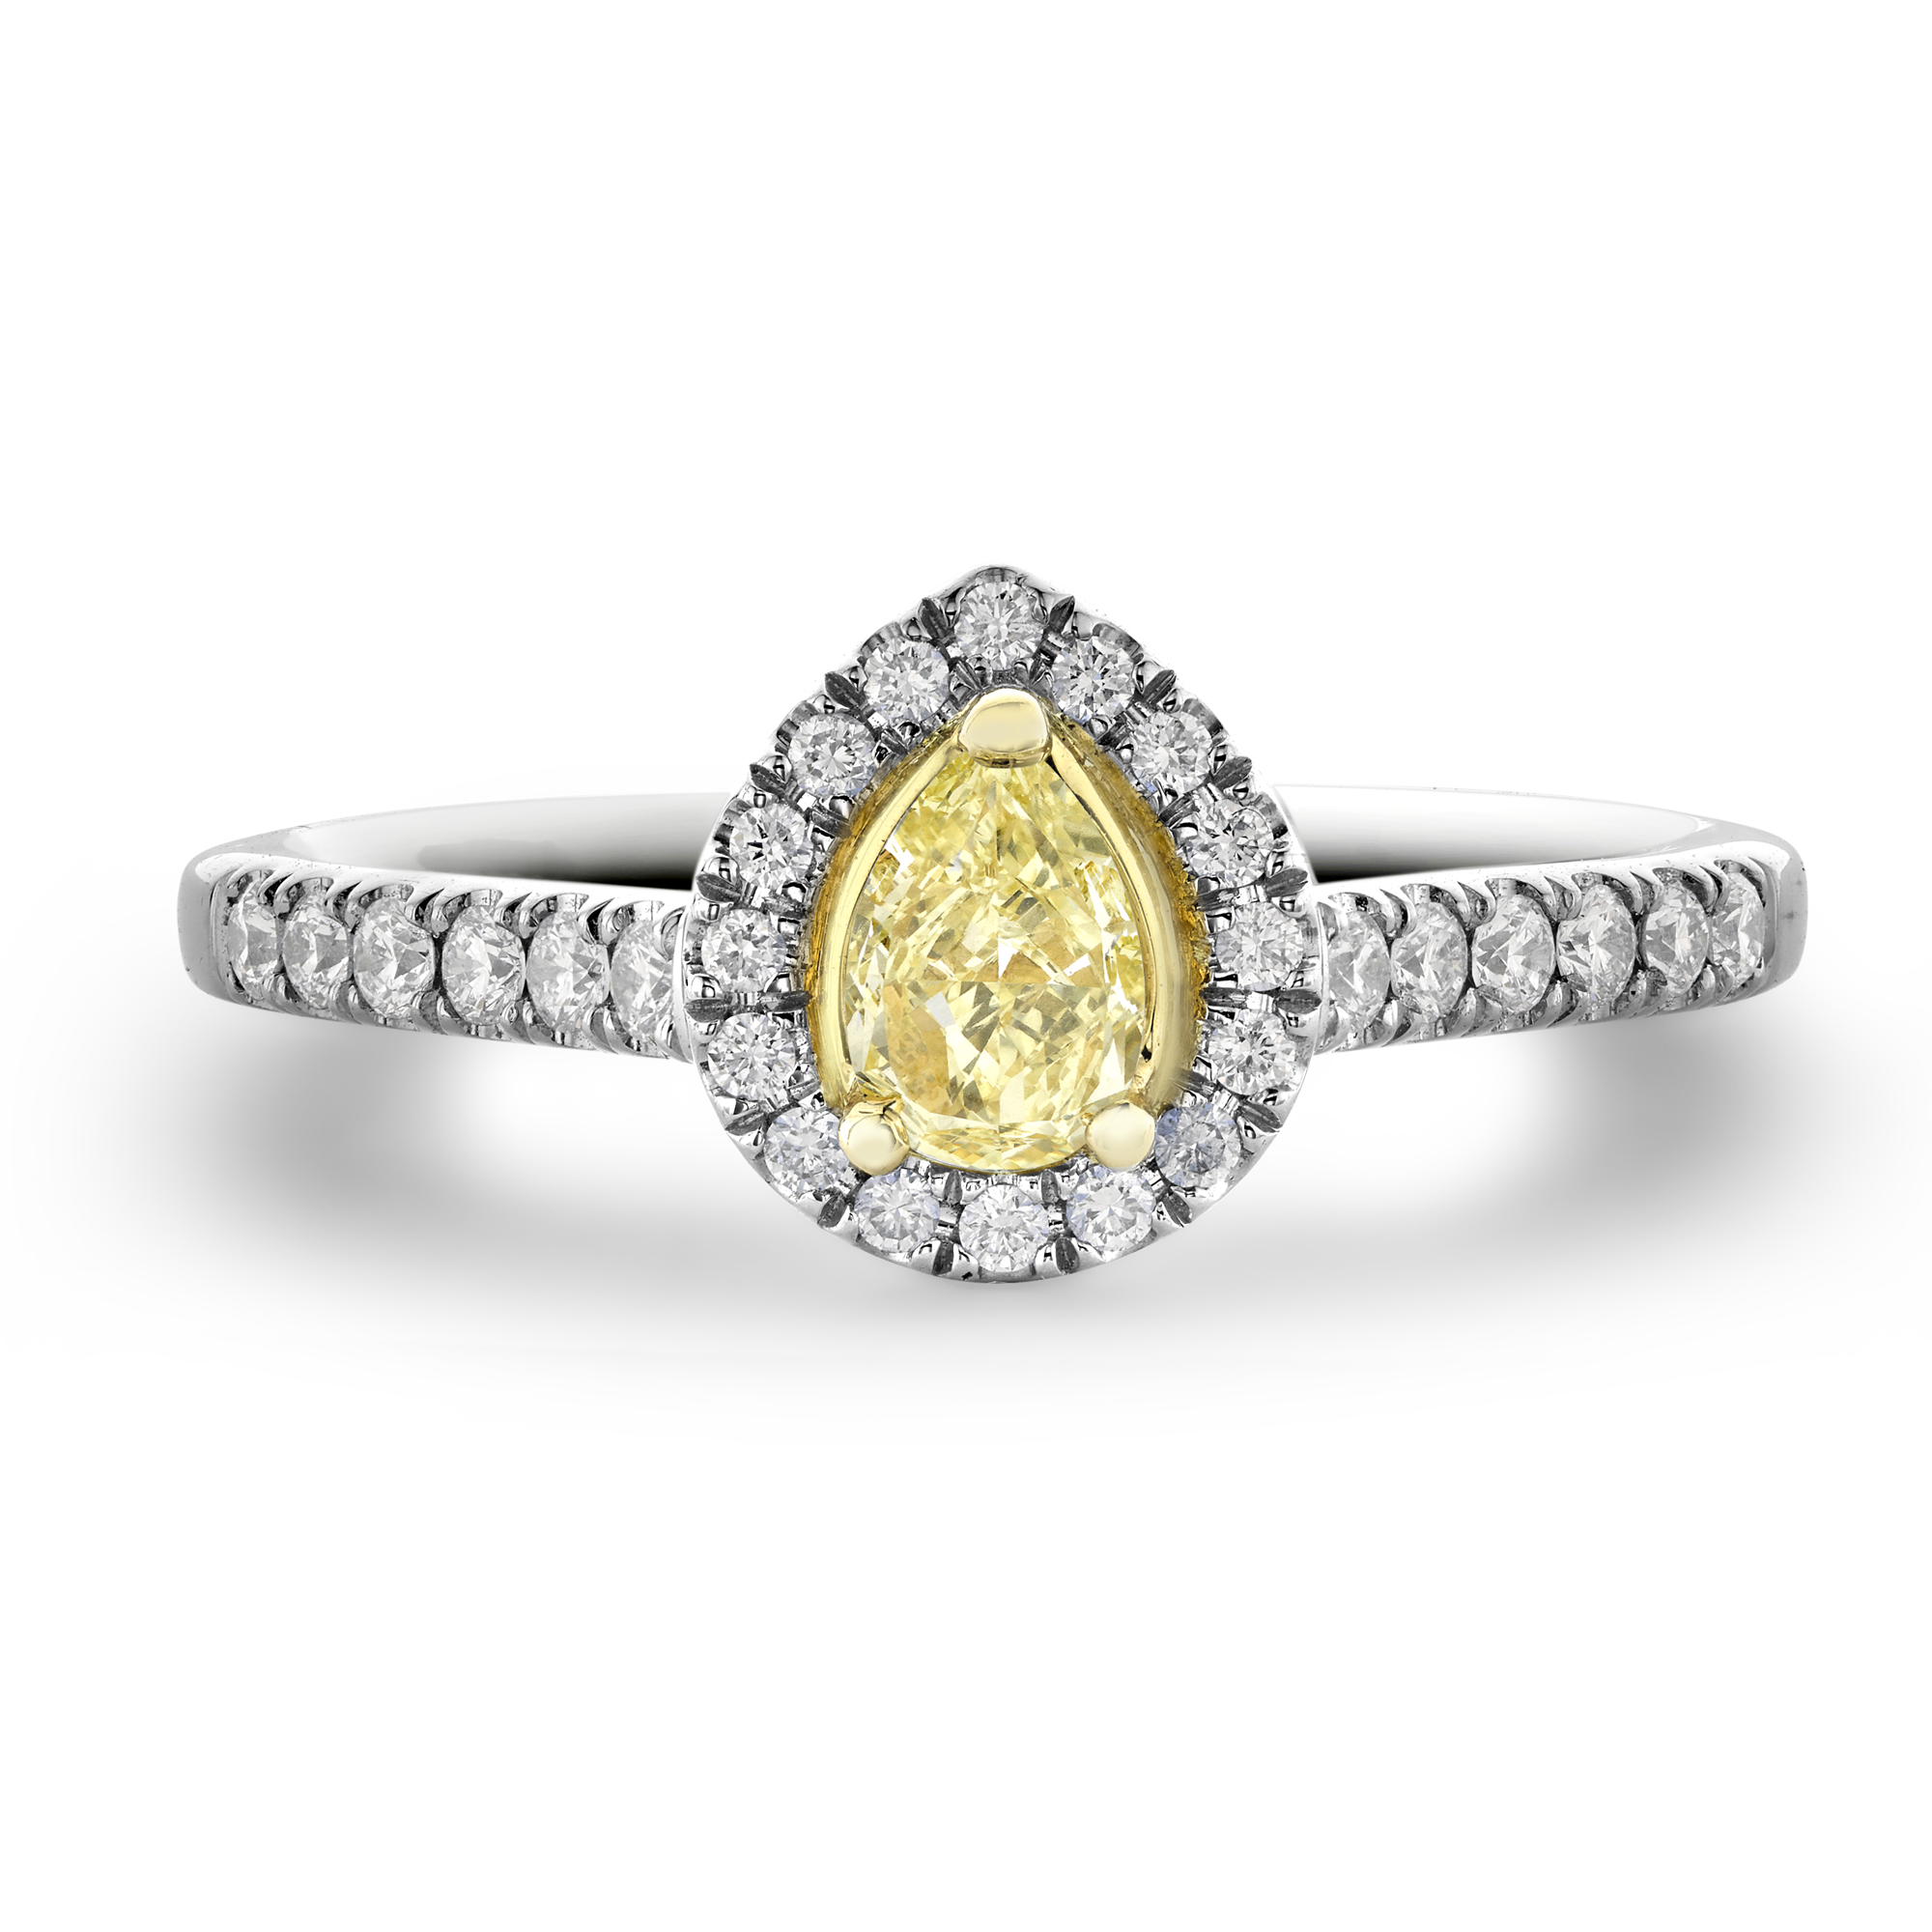 Celestial 0.31ct Fancy Light Yellow Diamond Cluster Ring Pearshape, Claw Set_2